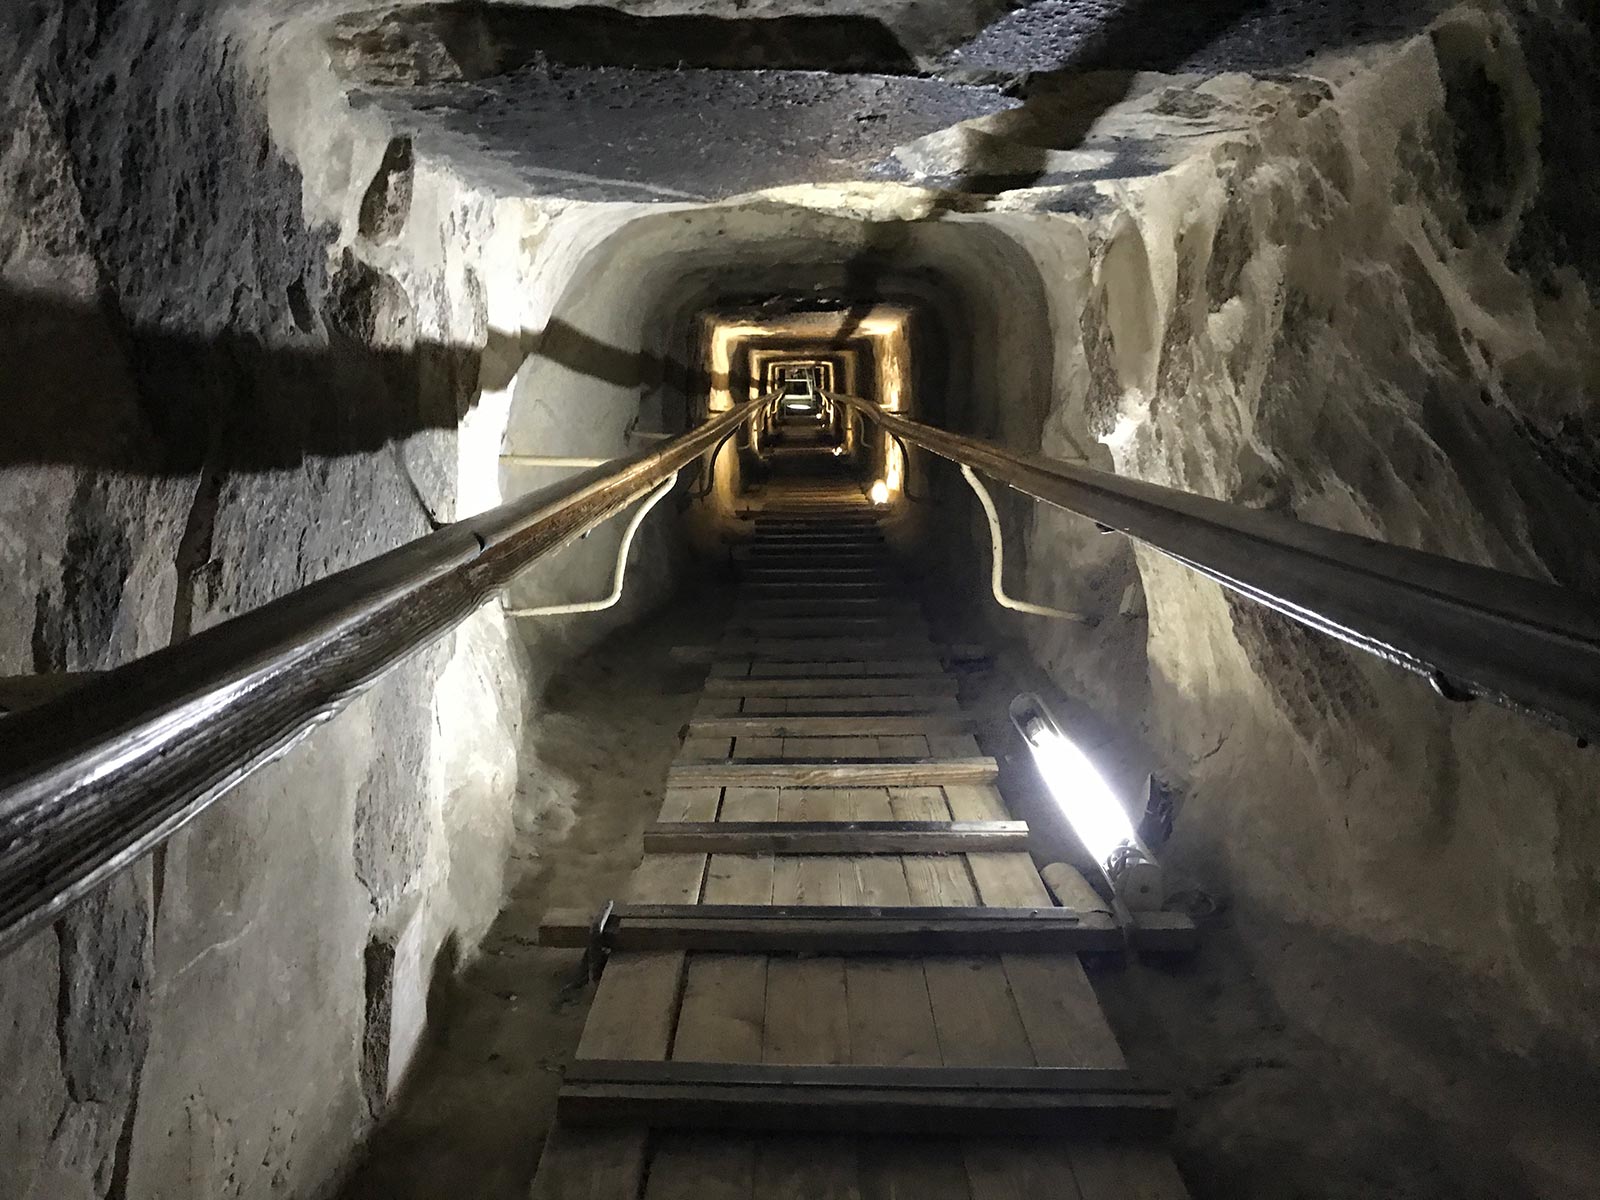 Ascending passageway of a pyramid in Cairo, Egypt. Getting inside the Ancient Pyramids of Giza